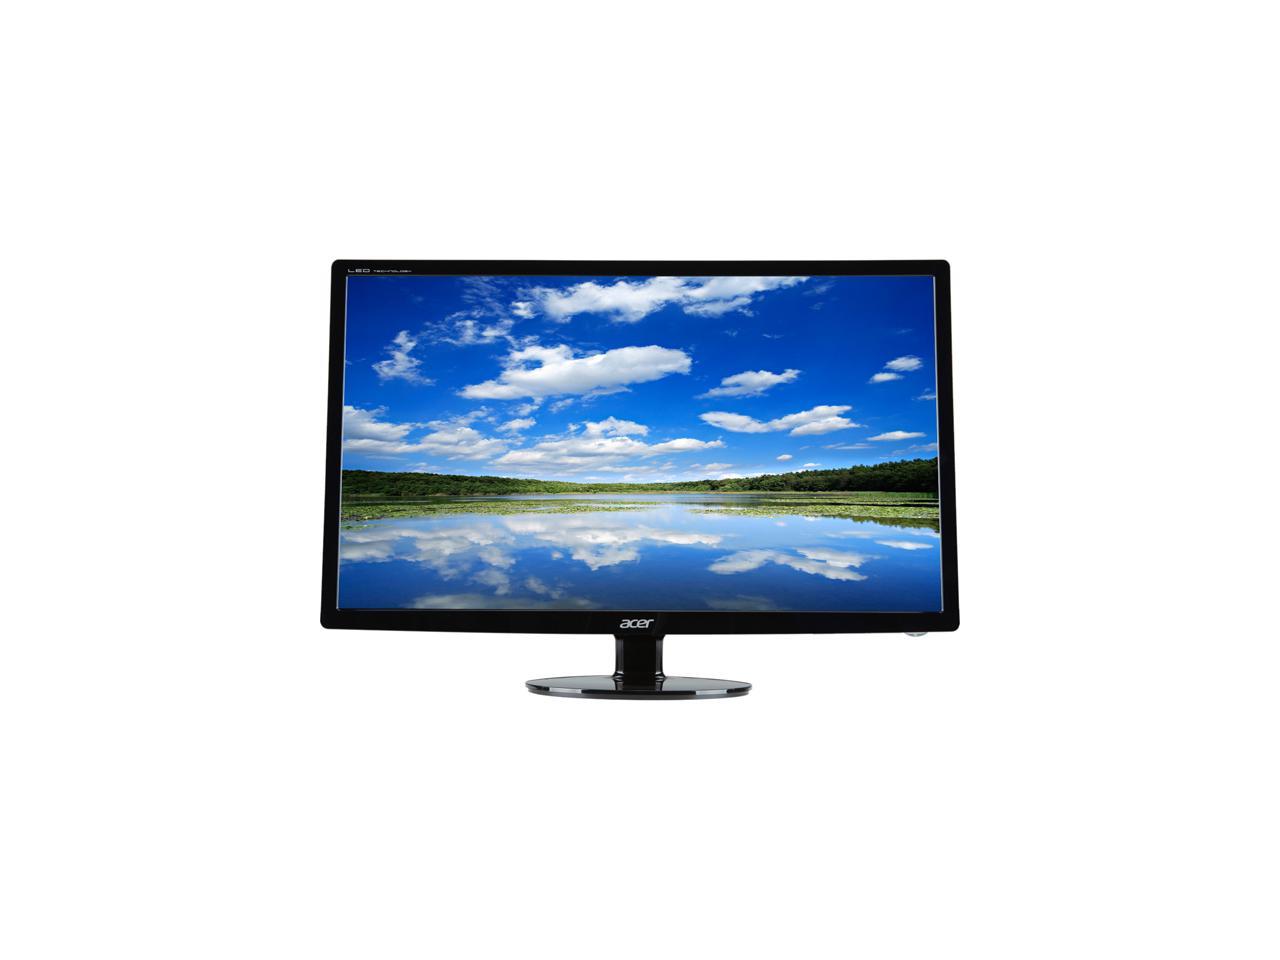 Acer Black S271HL 27" 6ms HDMI Widescreen LED backlit LCD Monitor 300 cd/m2 100,000,000:1, 178° wide view angel